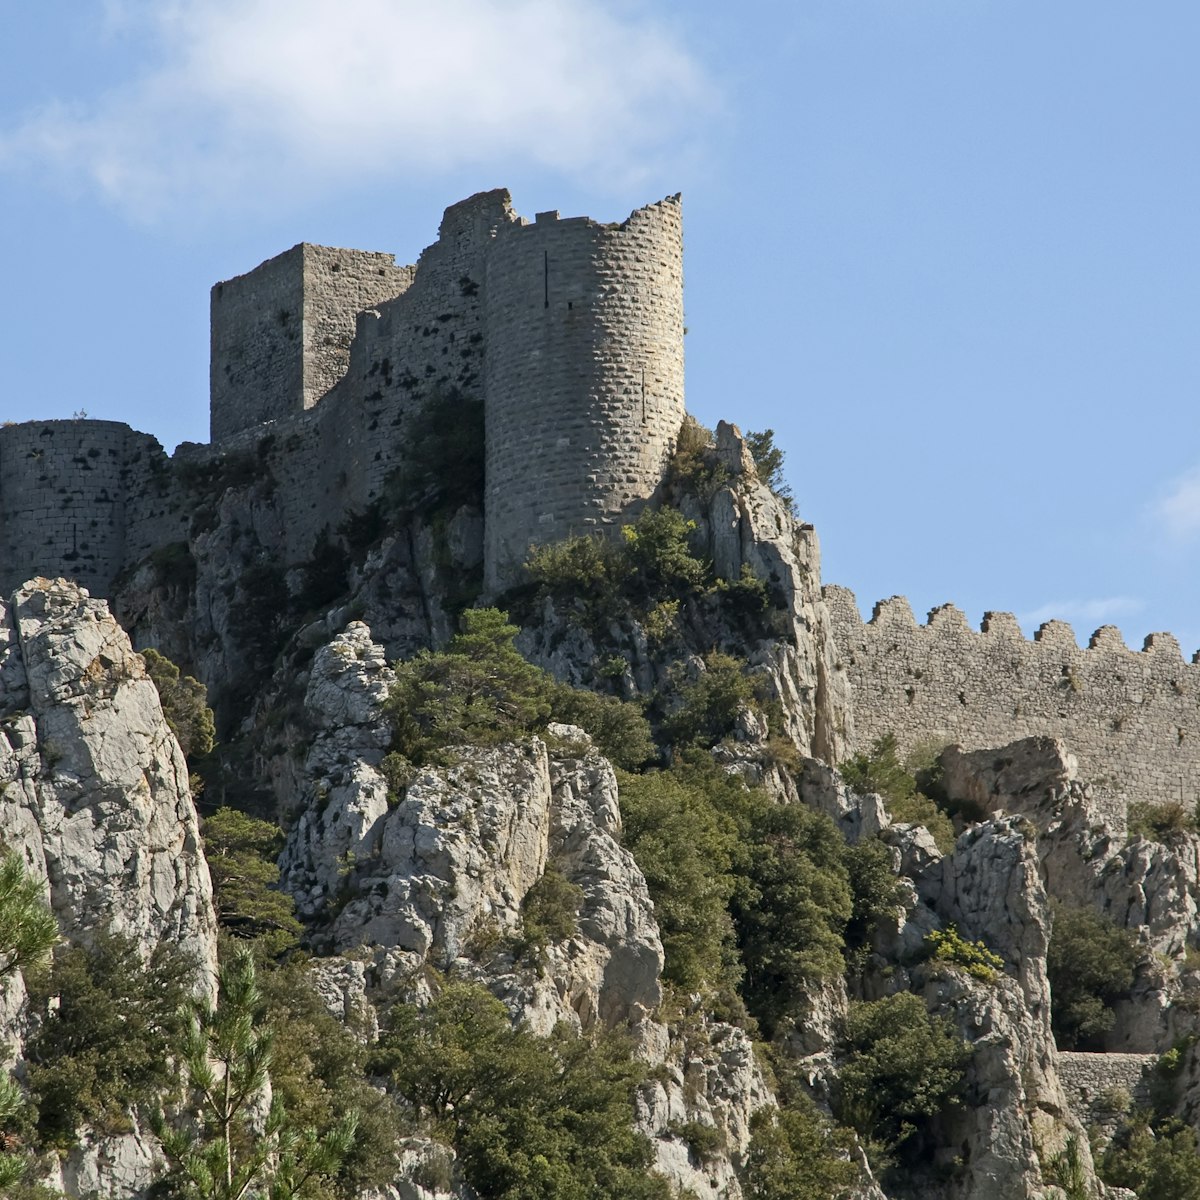 Chateau Puilaurens, one of the cathar castles in south France.